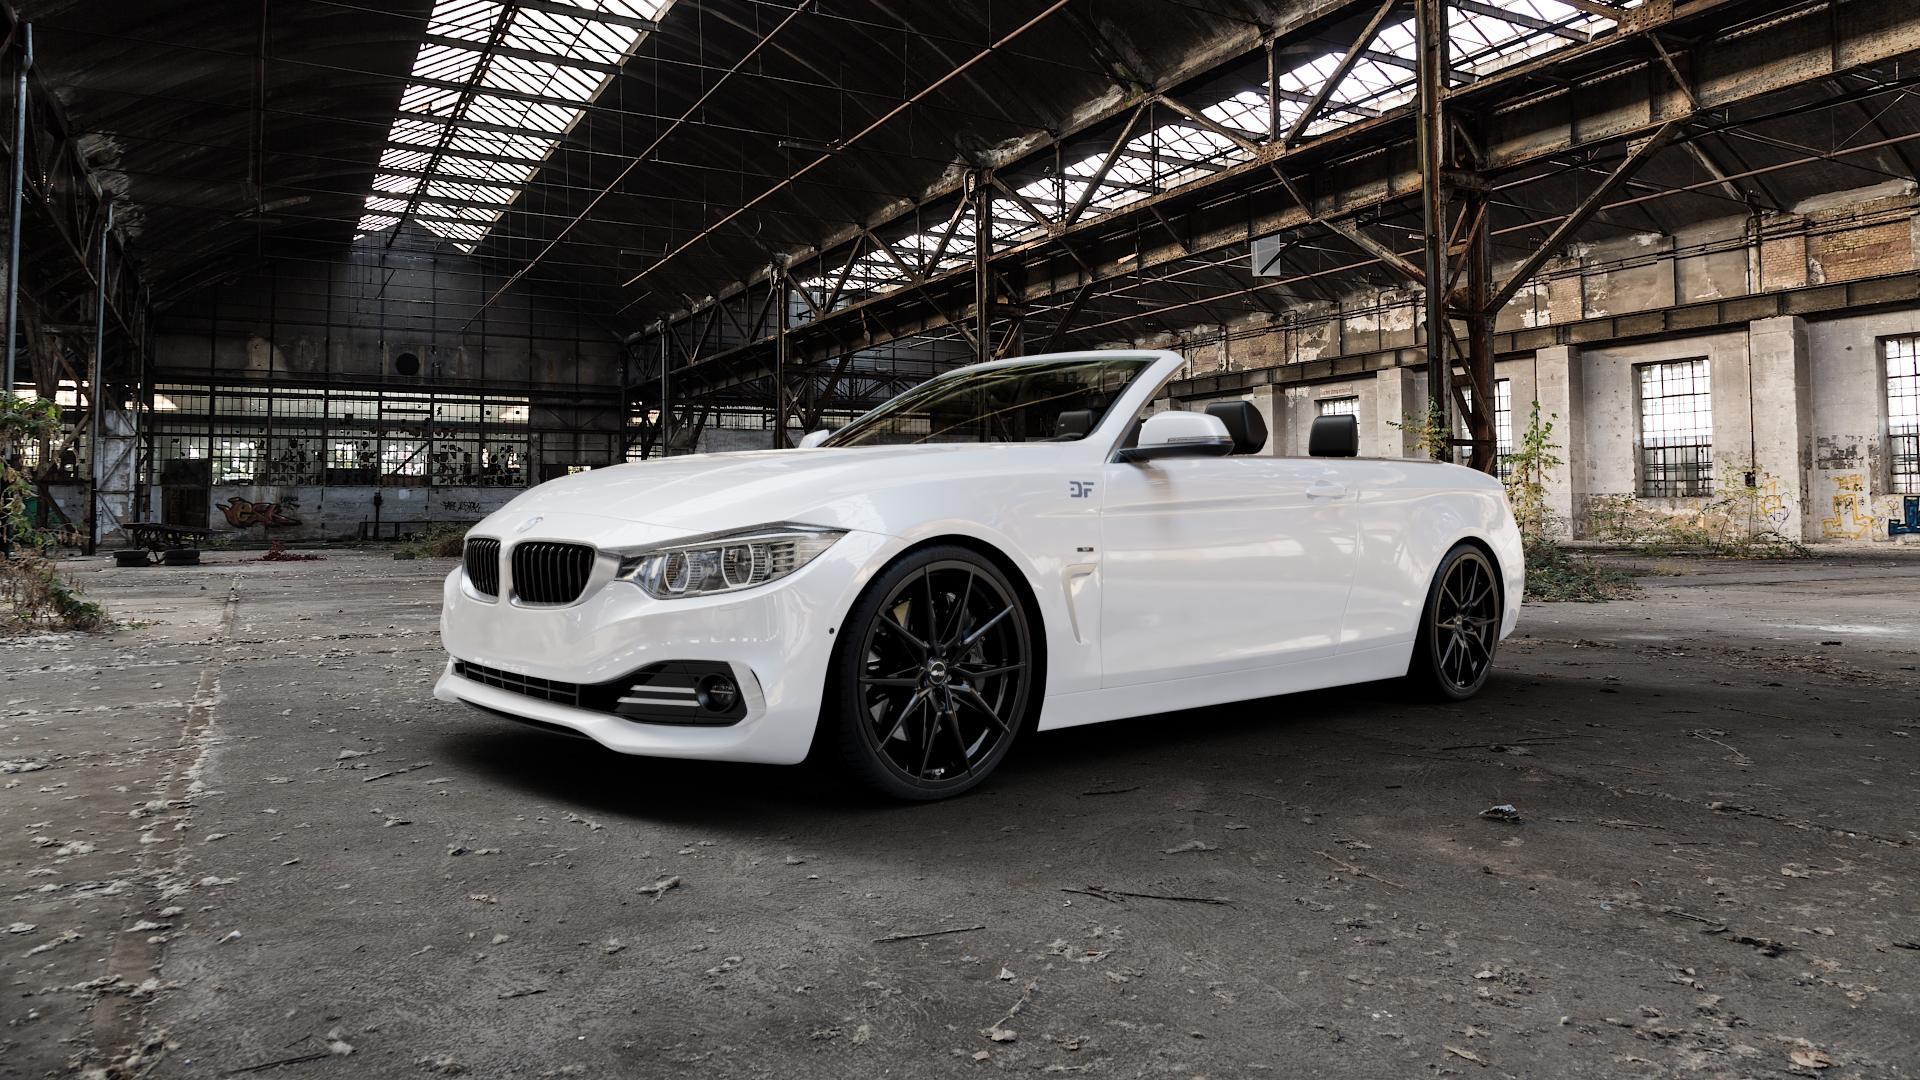 BMW 428i Type F33 (Cabrio) 2,0l 180kW (245 hp) Wheels and Tyre Packages |  velonity.com